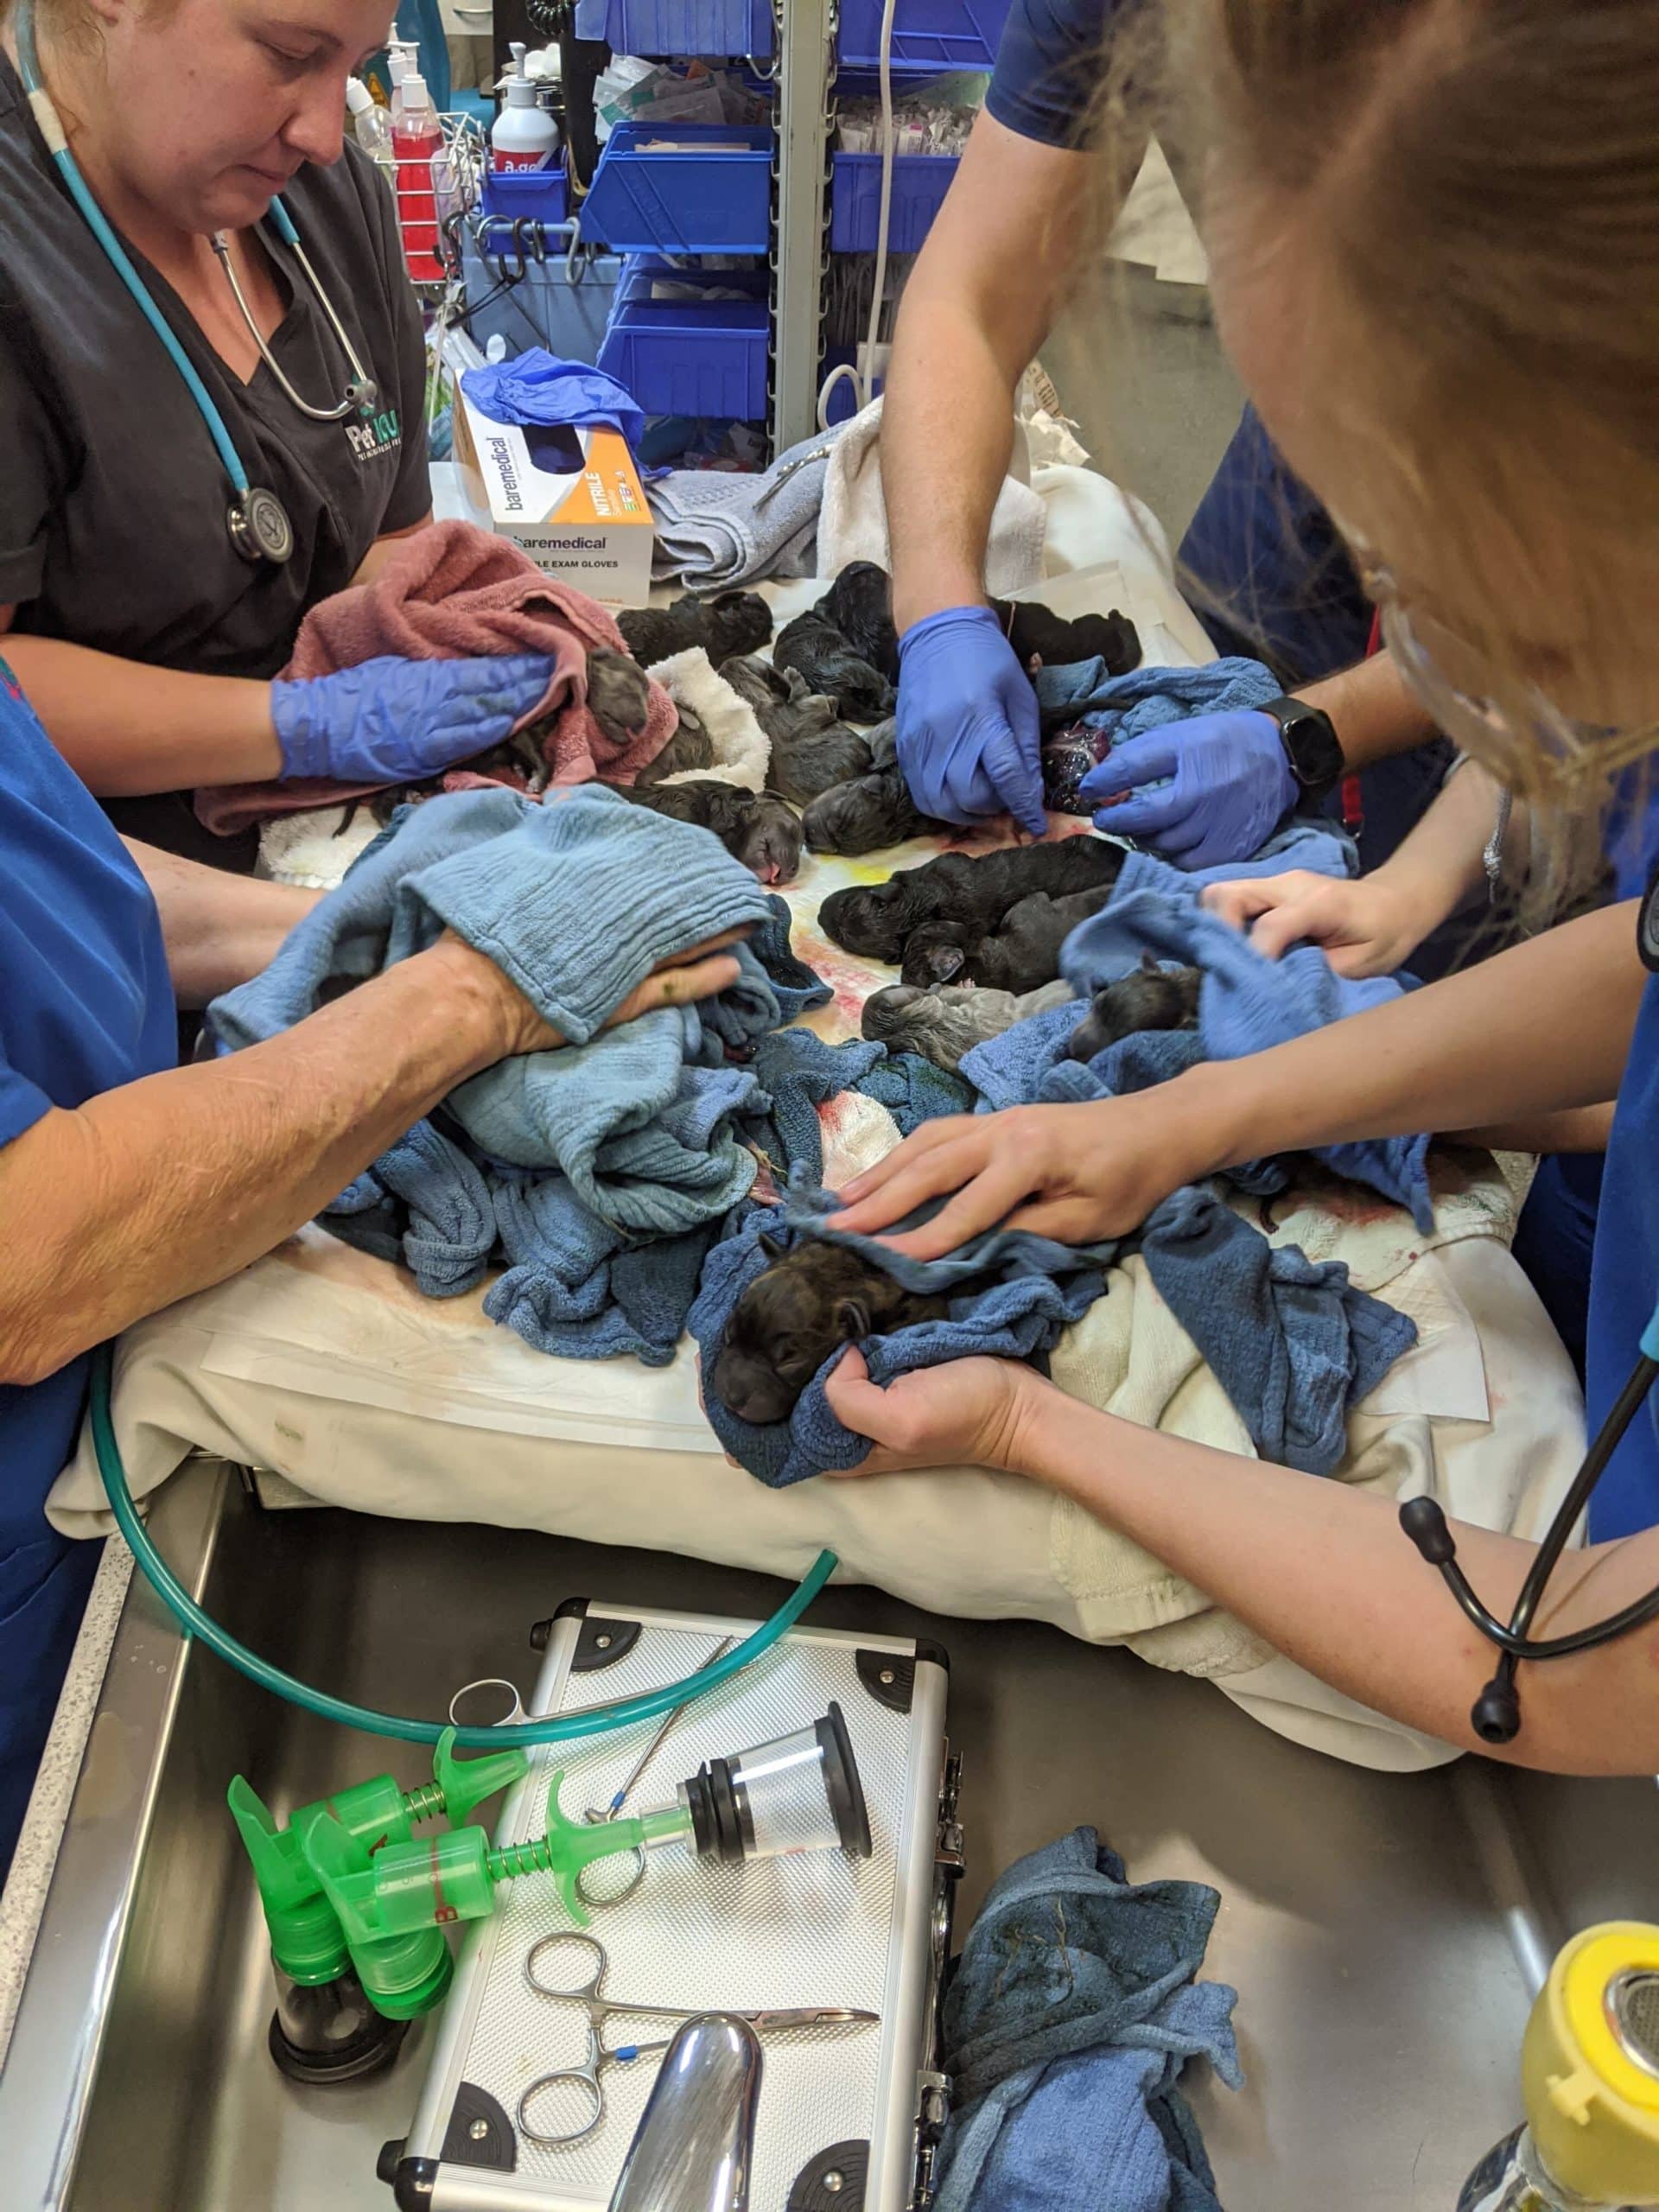 Record breaking litter of puppies being resuscitated after birth at Underwood